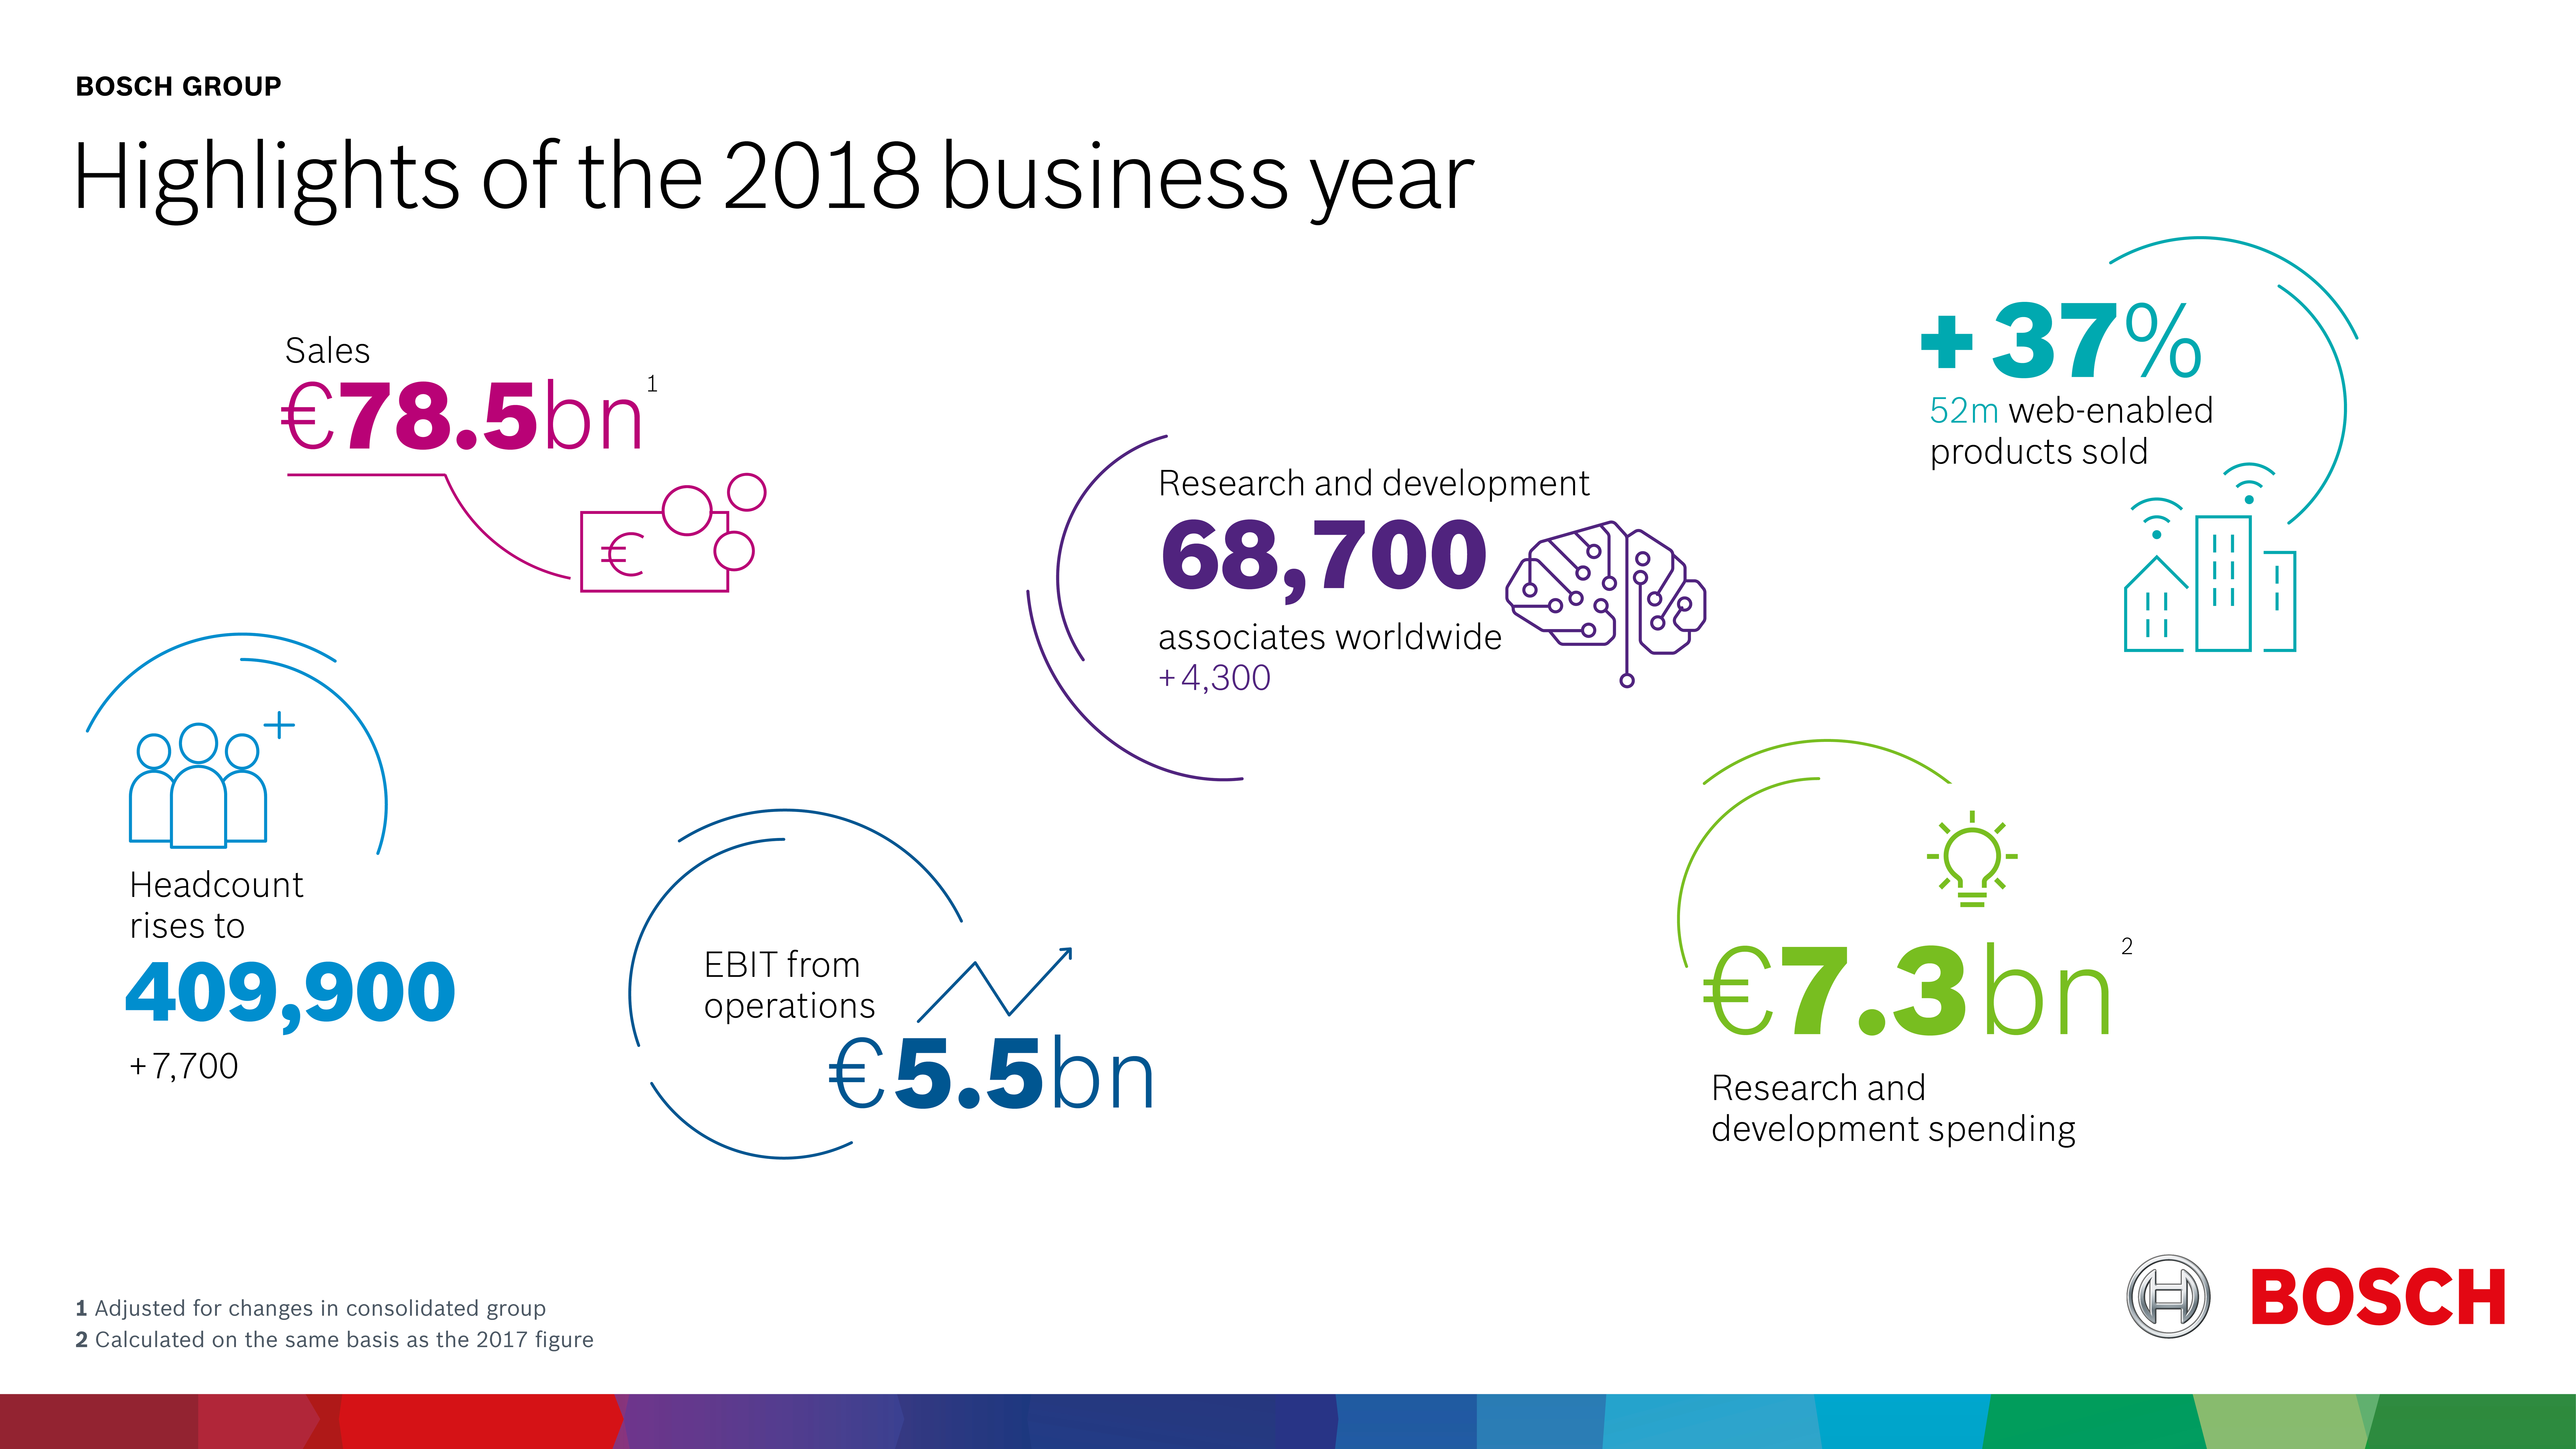 Highlights of the 2018 business year